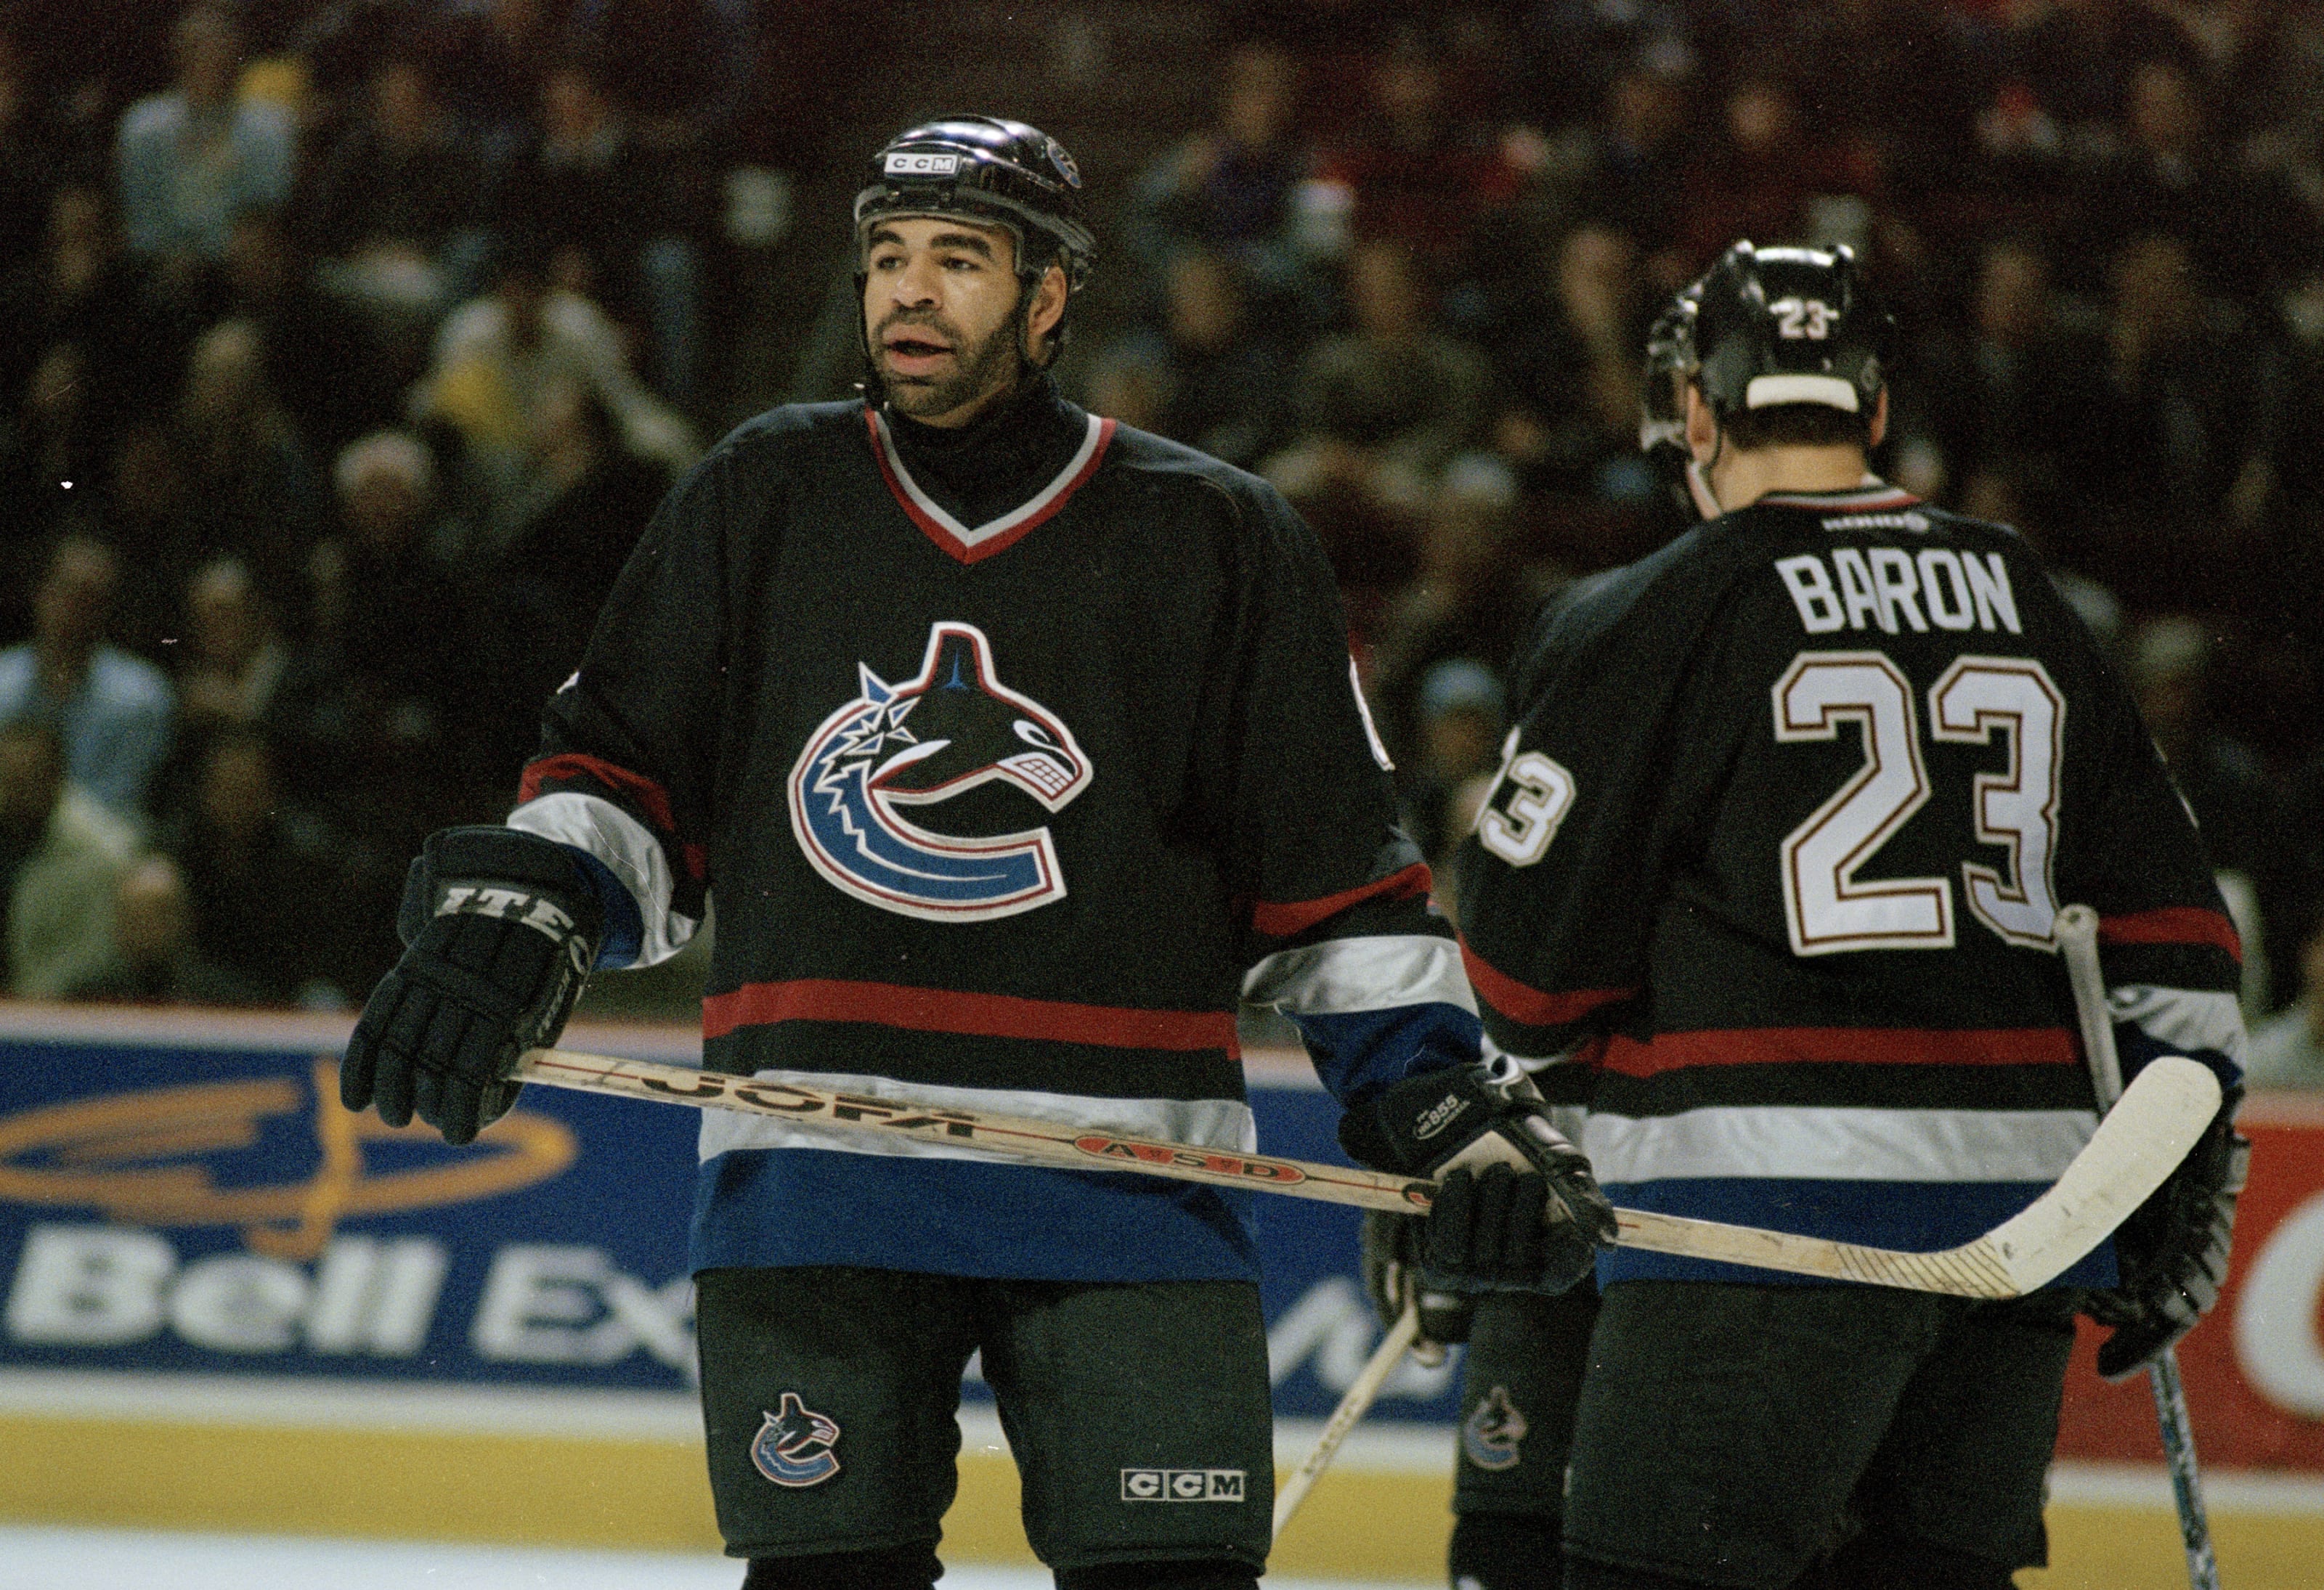 Top 5 Fighters in Vancouver Canucks history - The Hockey News